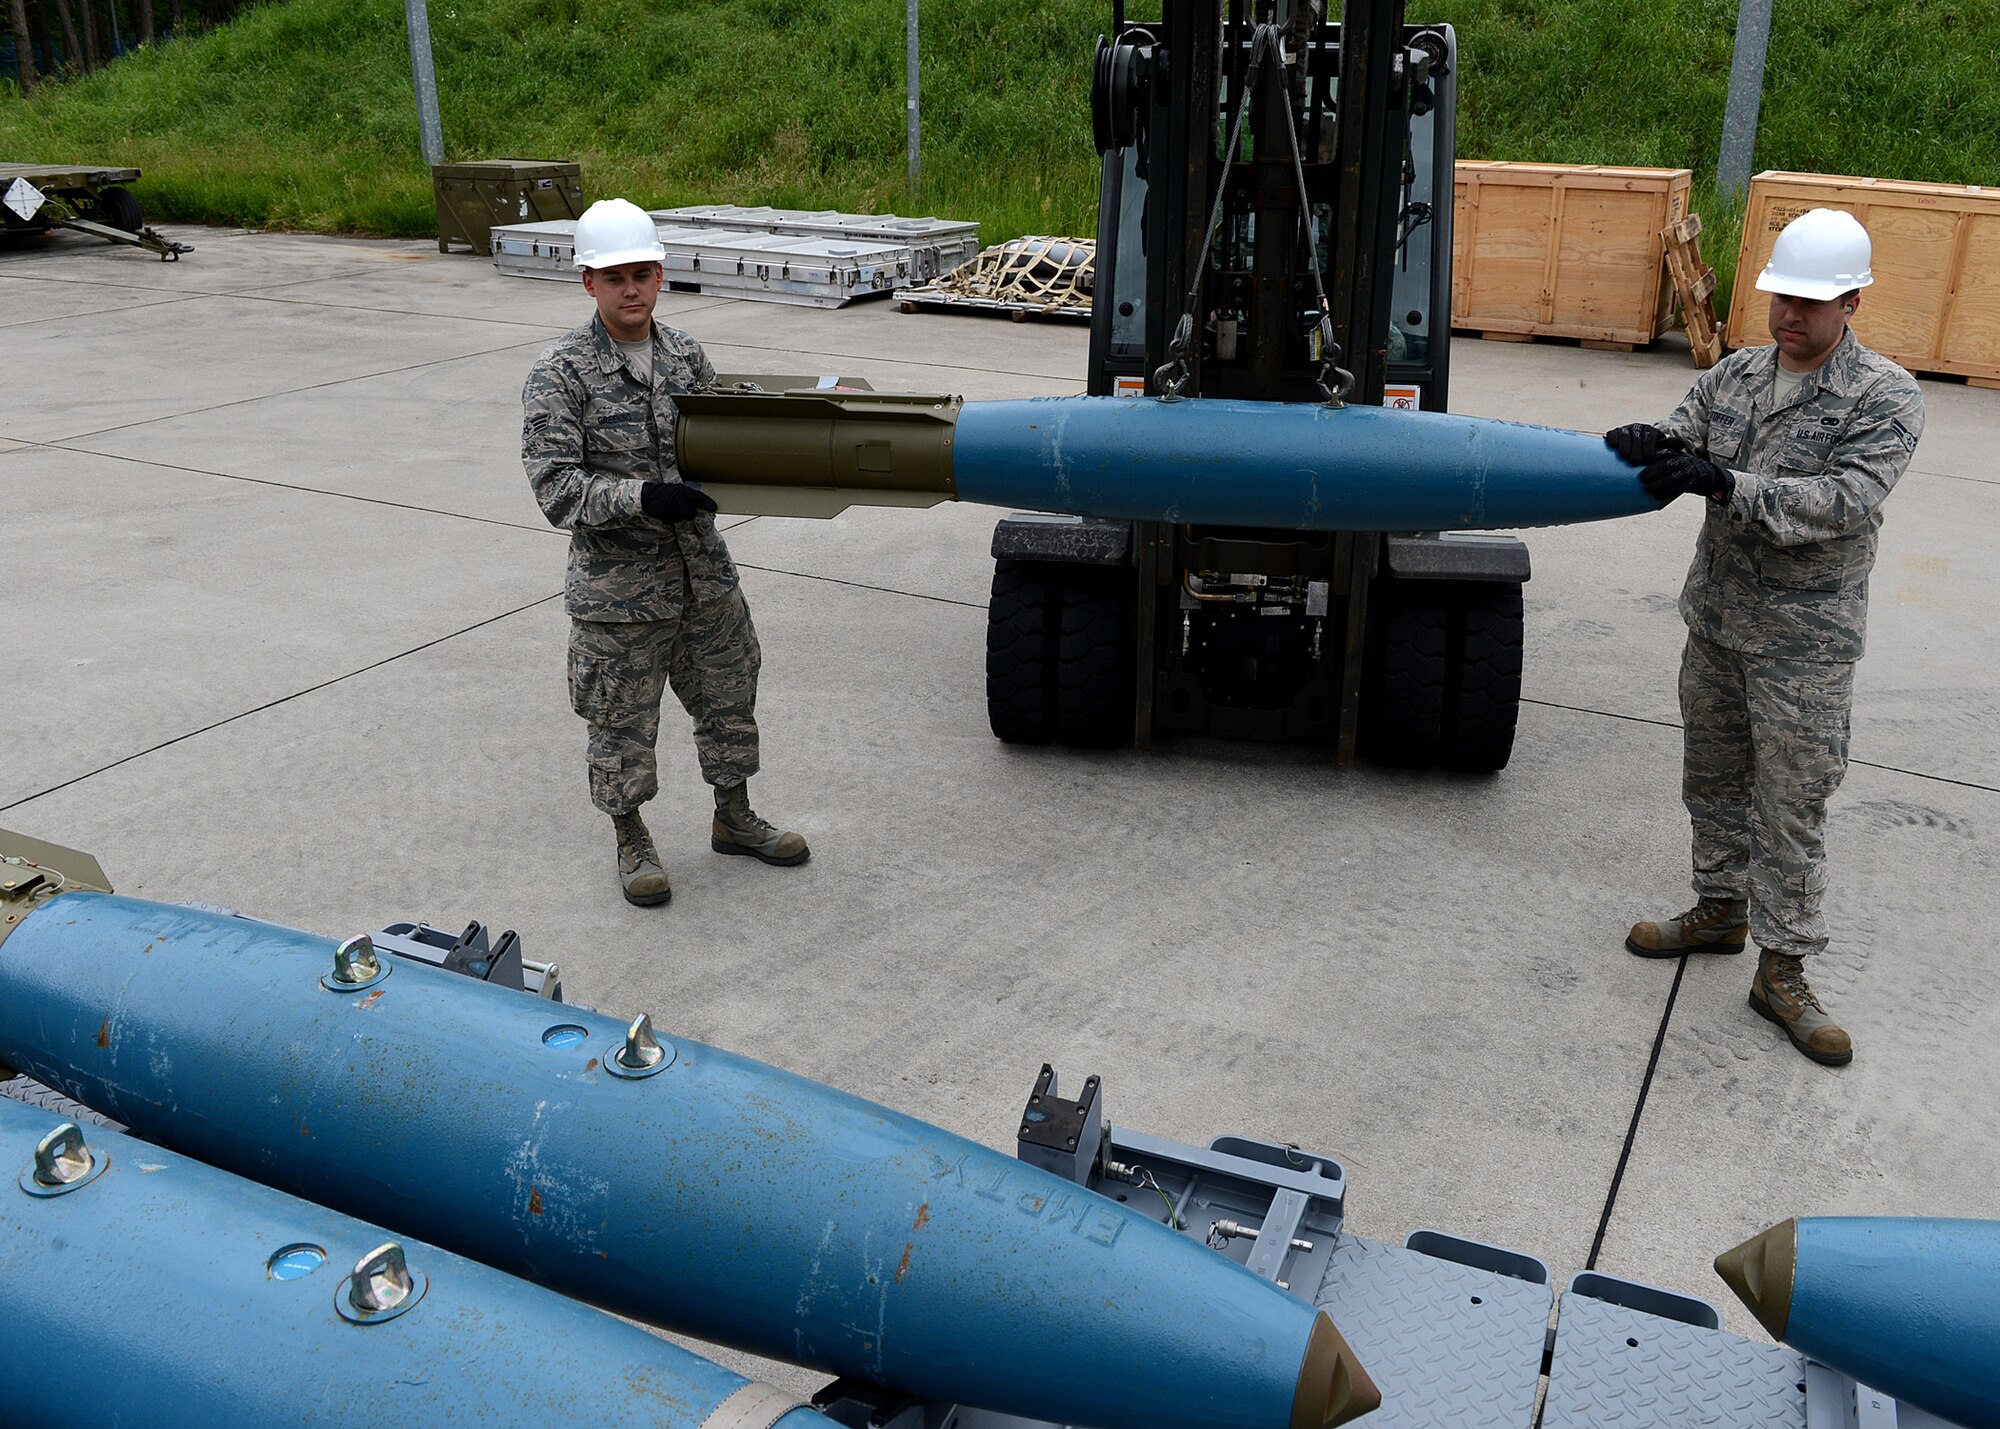 U.S. Air Force Senior Airman Timothy Greening, 52nd Equipment Maintenance Squadron precision guided munitions crew member from Norman, Okla., and Airman 1st Class Joseph Stoffer, 52nd EMS conventional maintenance crew member from Warsaw, N.Y., move a Bomb Drop Unit-50 training explosive to a transport trailer at Lask Air Base, Poland, June 12, 2014. Eighteen U.S. Air Force F-16 Fighting Falcon fighter aircraft from Spangdahlem Air Base, Germany, used training munitions during exercises BALTOPS 14 and EAGLE TALON. While increasing bilateral defense ties with host nation partners, the exercises also trained pilots in a combat environment to build relationships with NATO allies. (U.S. Air Force photo by Airman 1st Class Kyle Gese/Released)